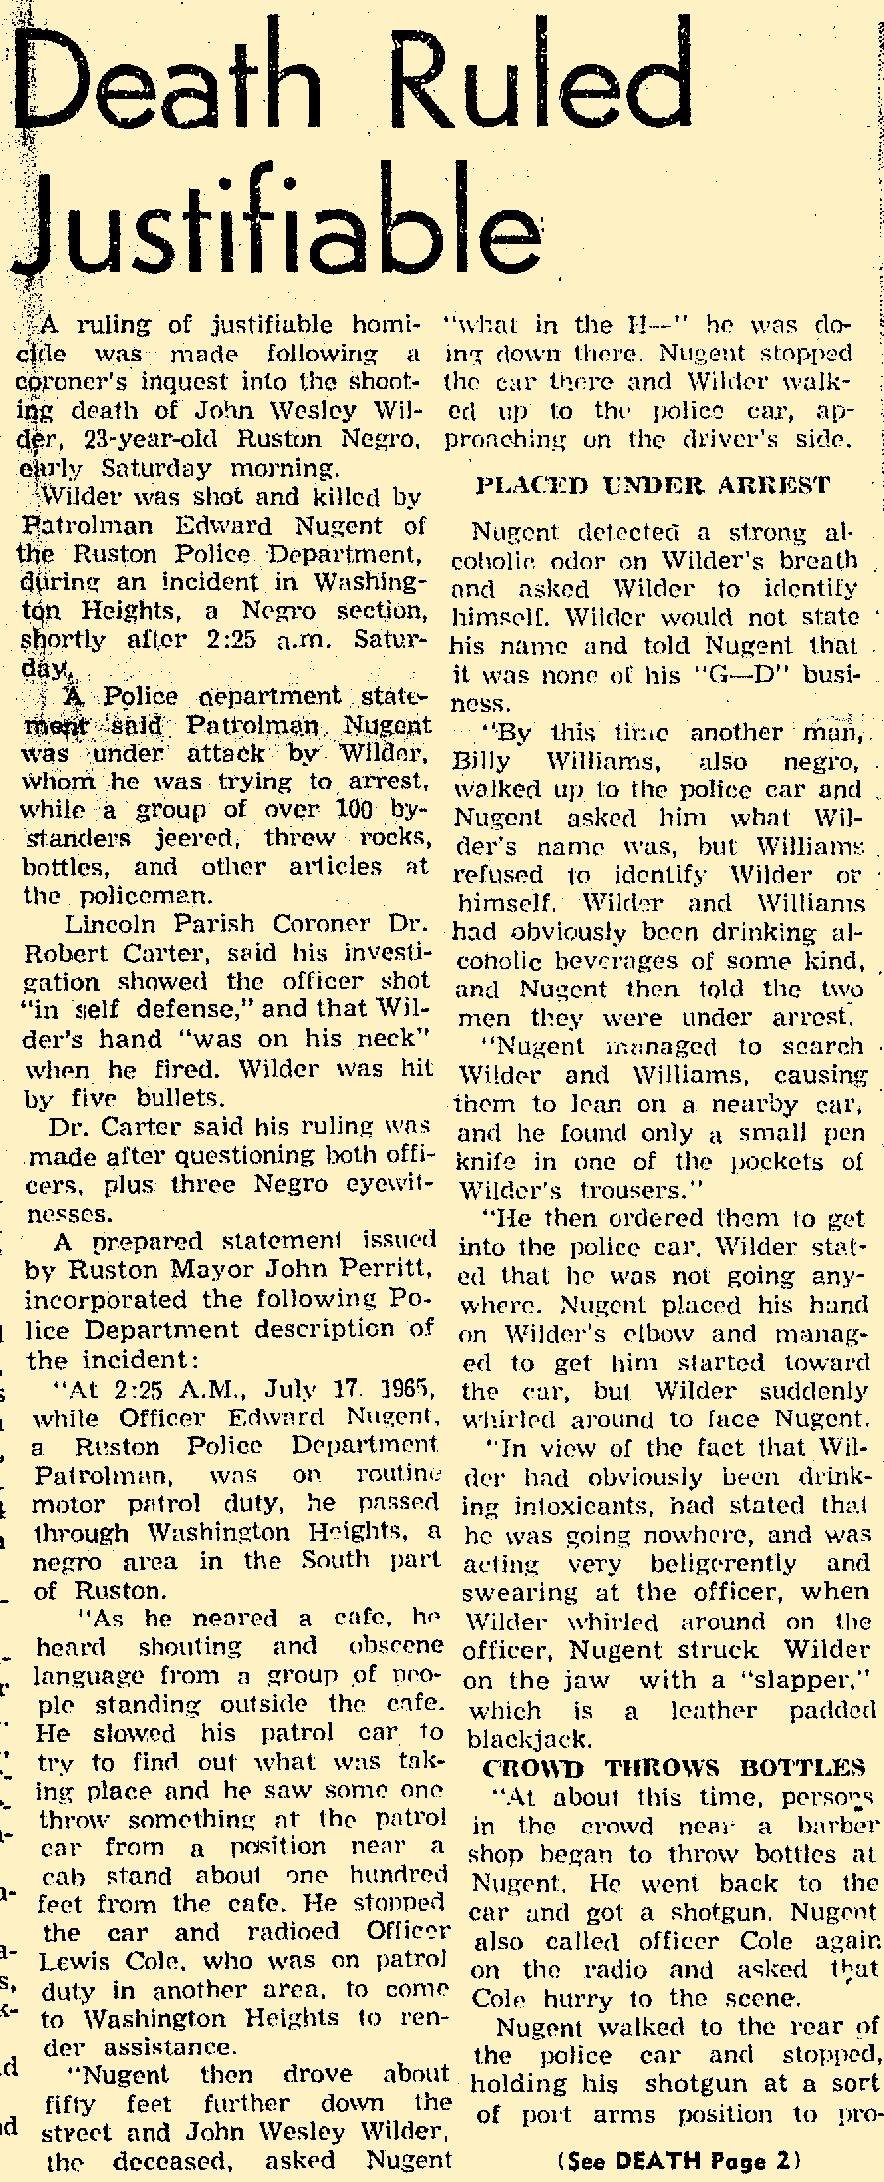  Excerpt from the July 19, 1965 Ruston Daily Leader article on the killing of John Wesley Wilder by Ruston police officer Edward Alton Nugent. 